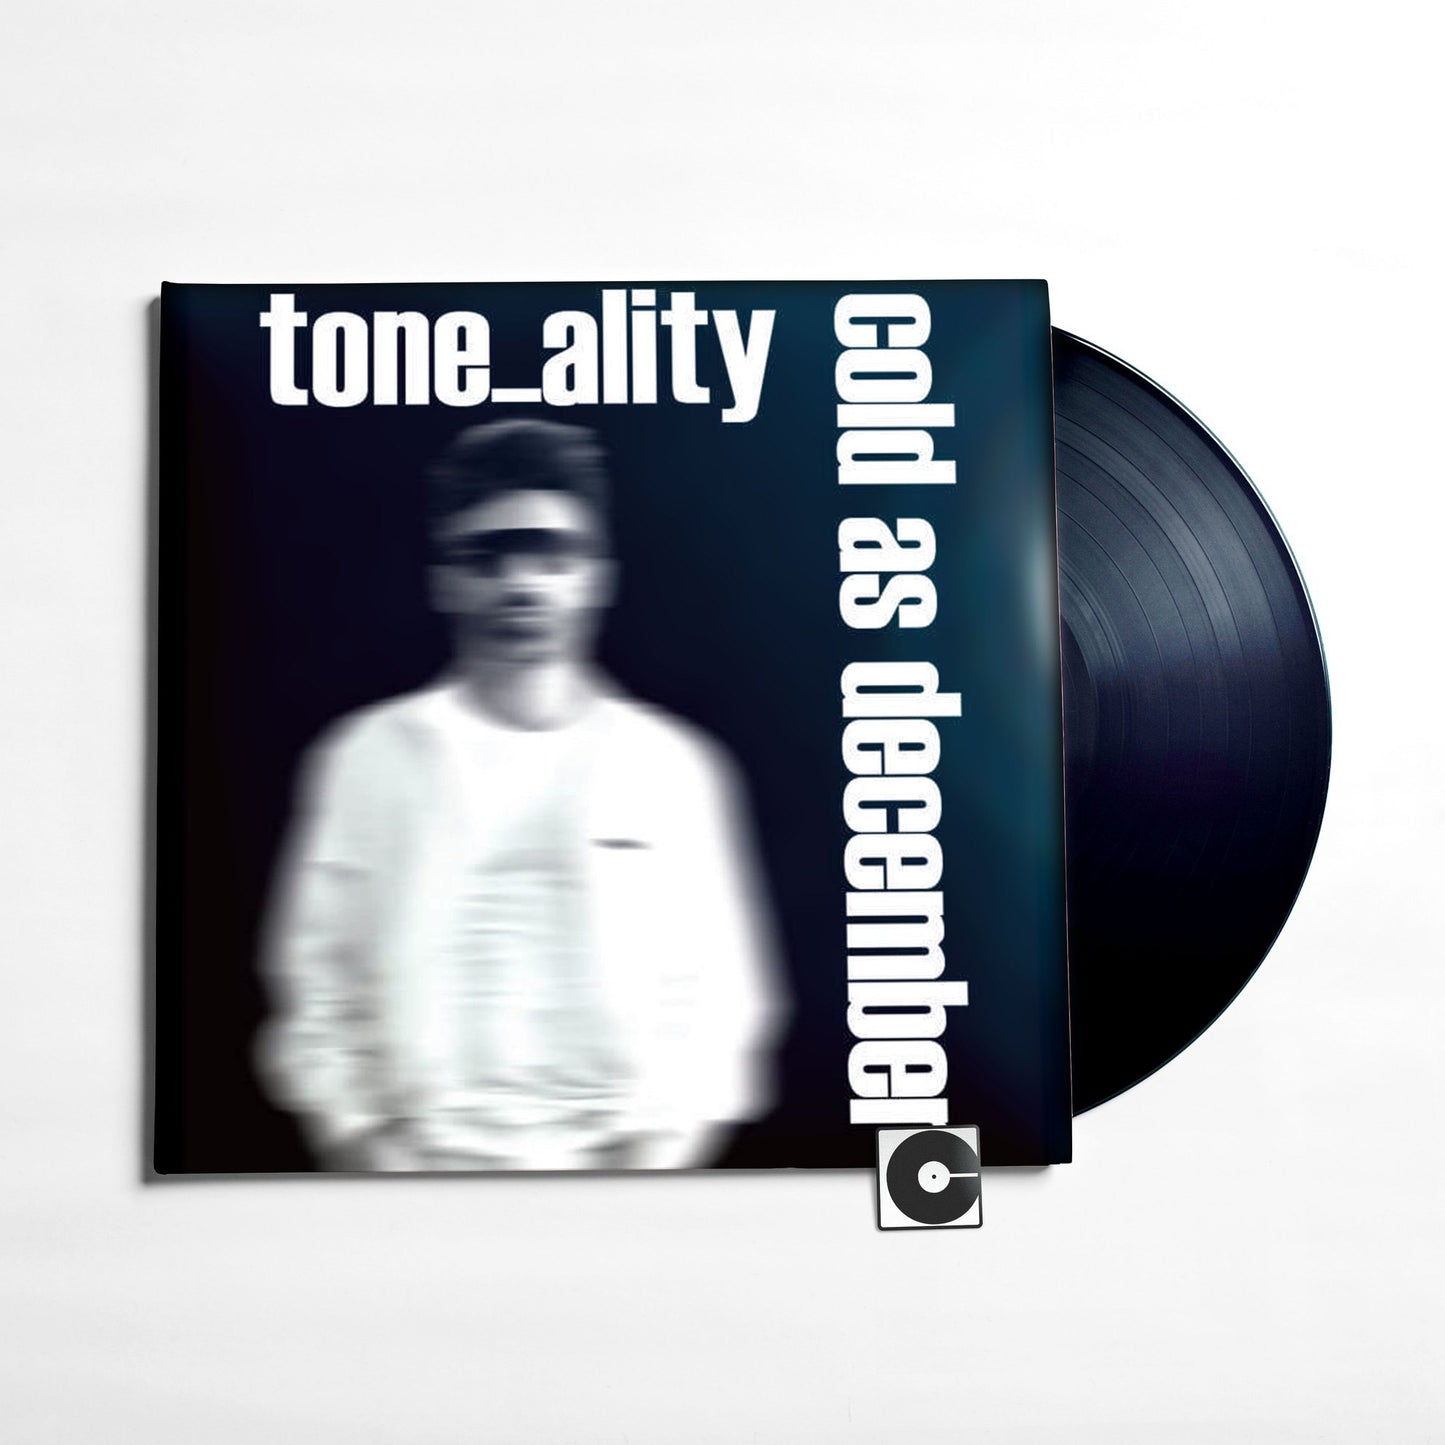 Tone_ality - "Cold As December"